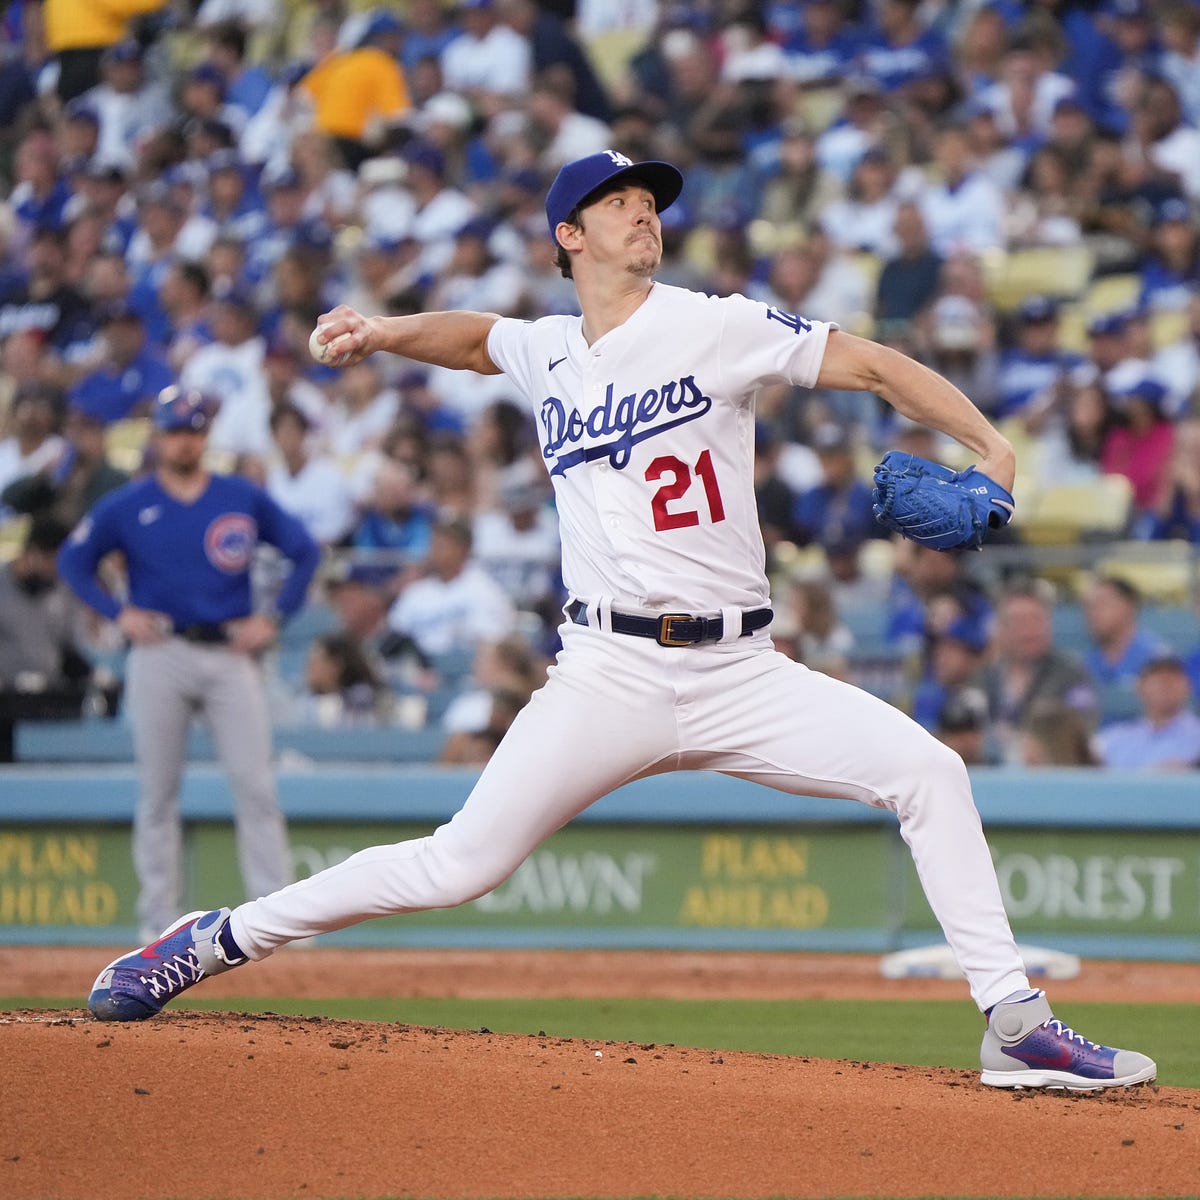 Pitchers the Dodgers could sign to replace injured Walker Buehler in 2023